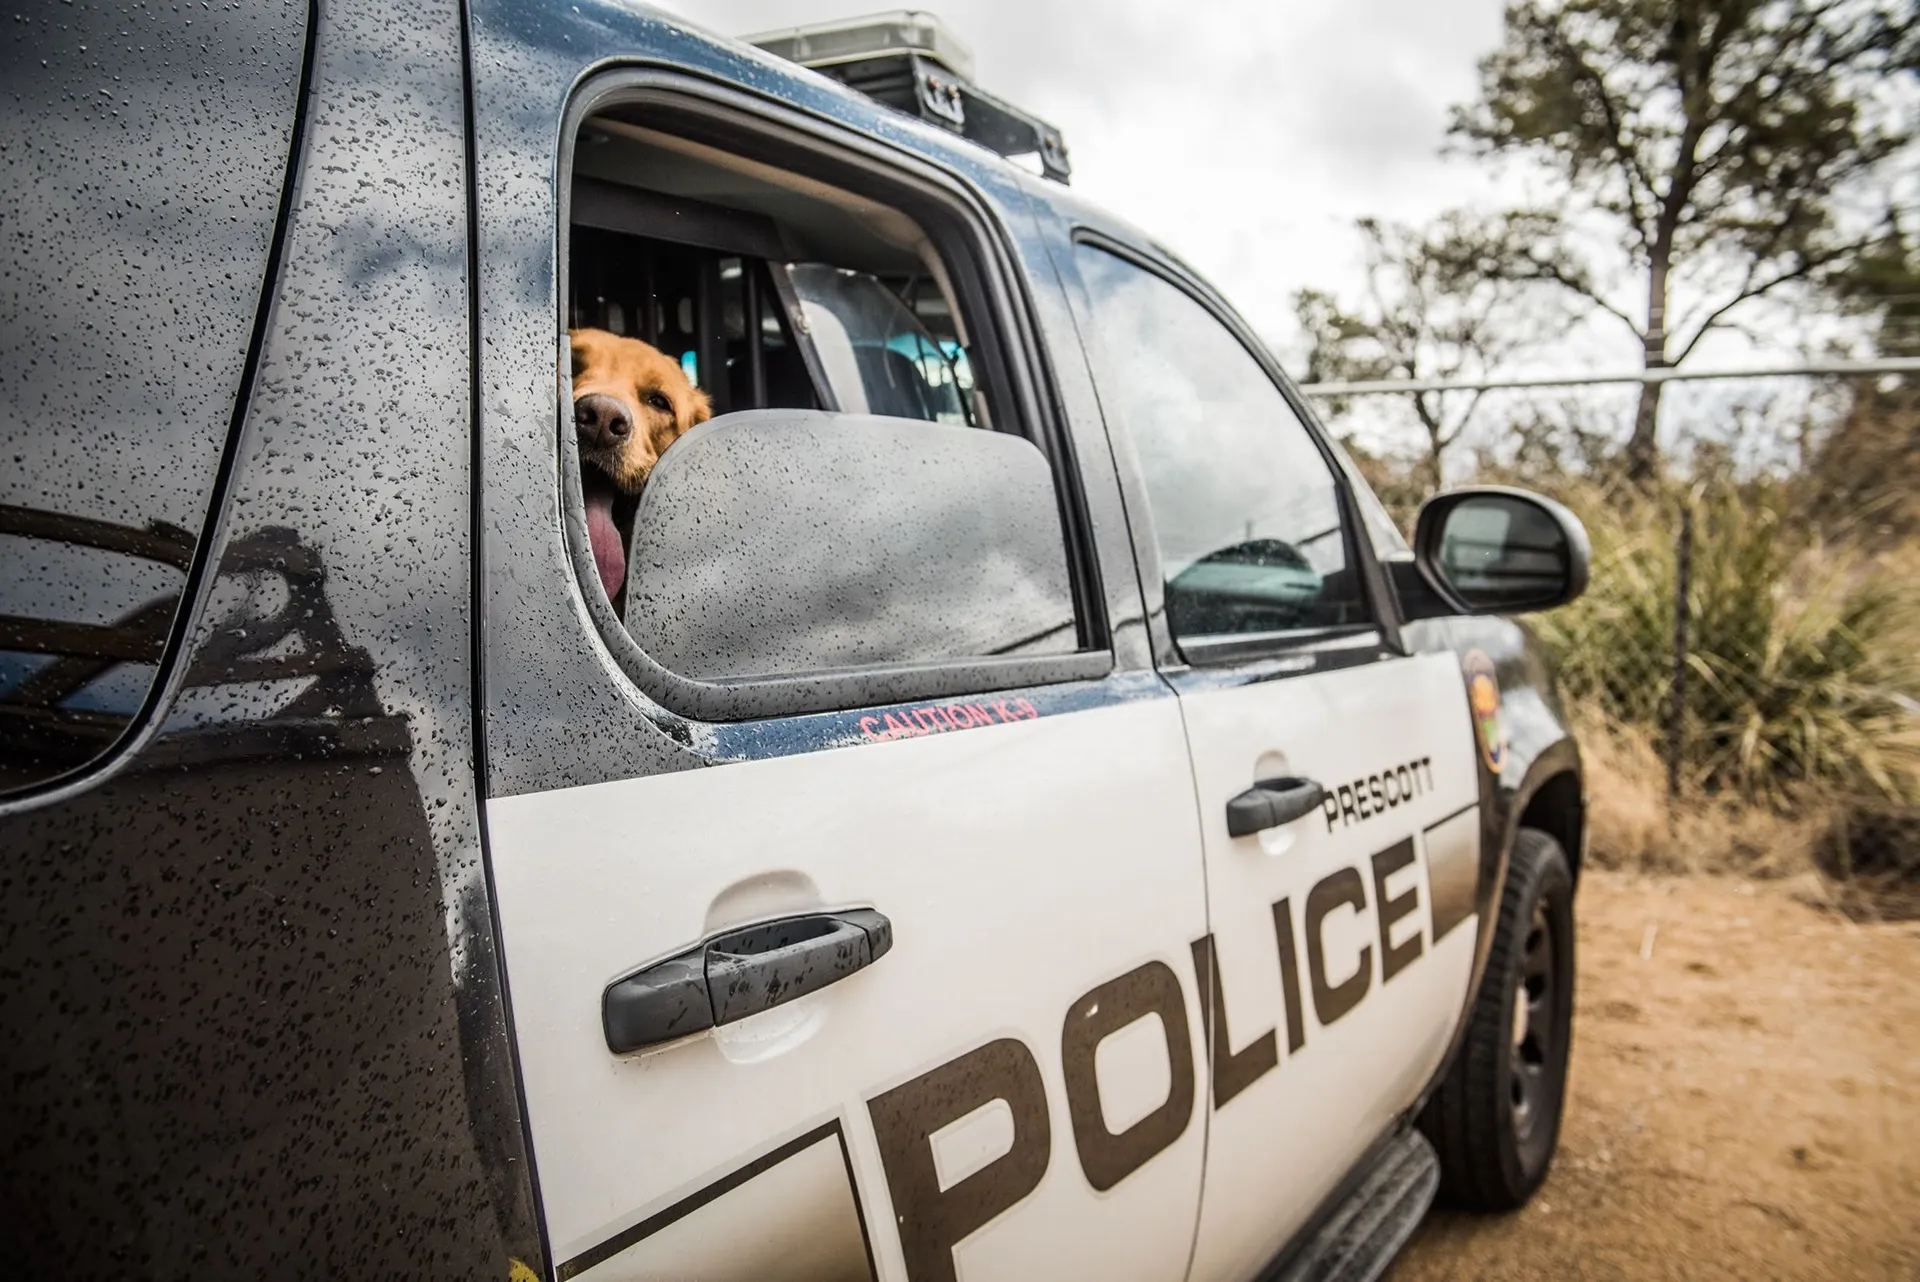 Prescott Police Canine in the back seat.